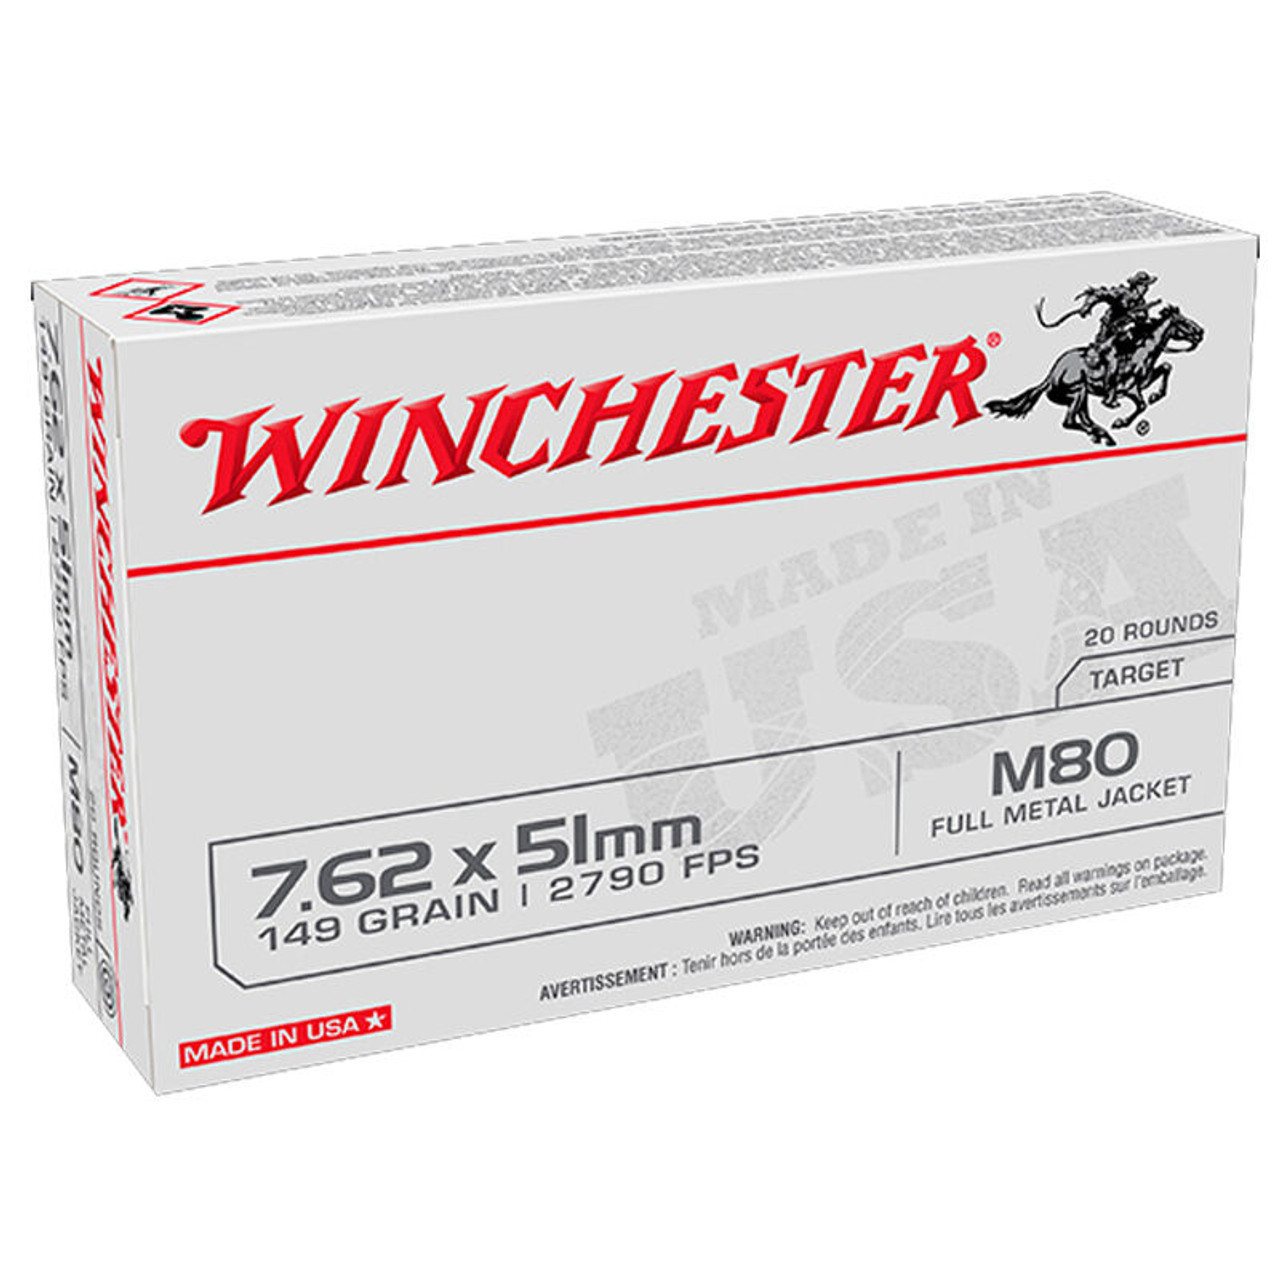 Winchester USA Target 7.62x51FMJ M80